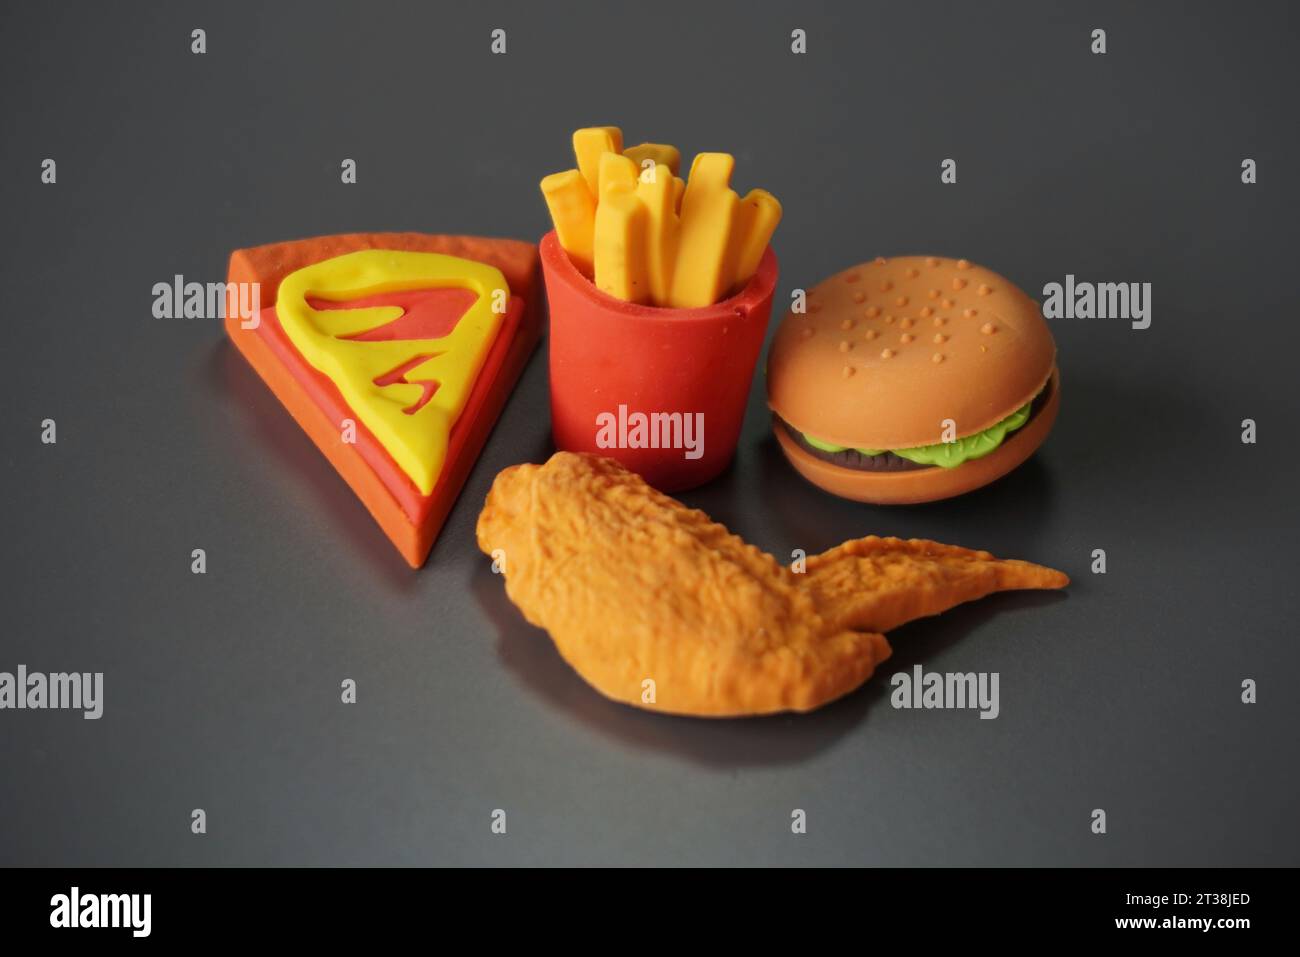 Closeup image of junk foods like burger, fries and pizza. Bad eating habits concept. Stock Photo